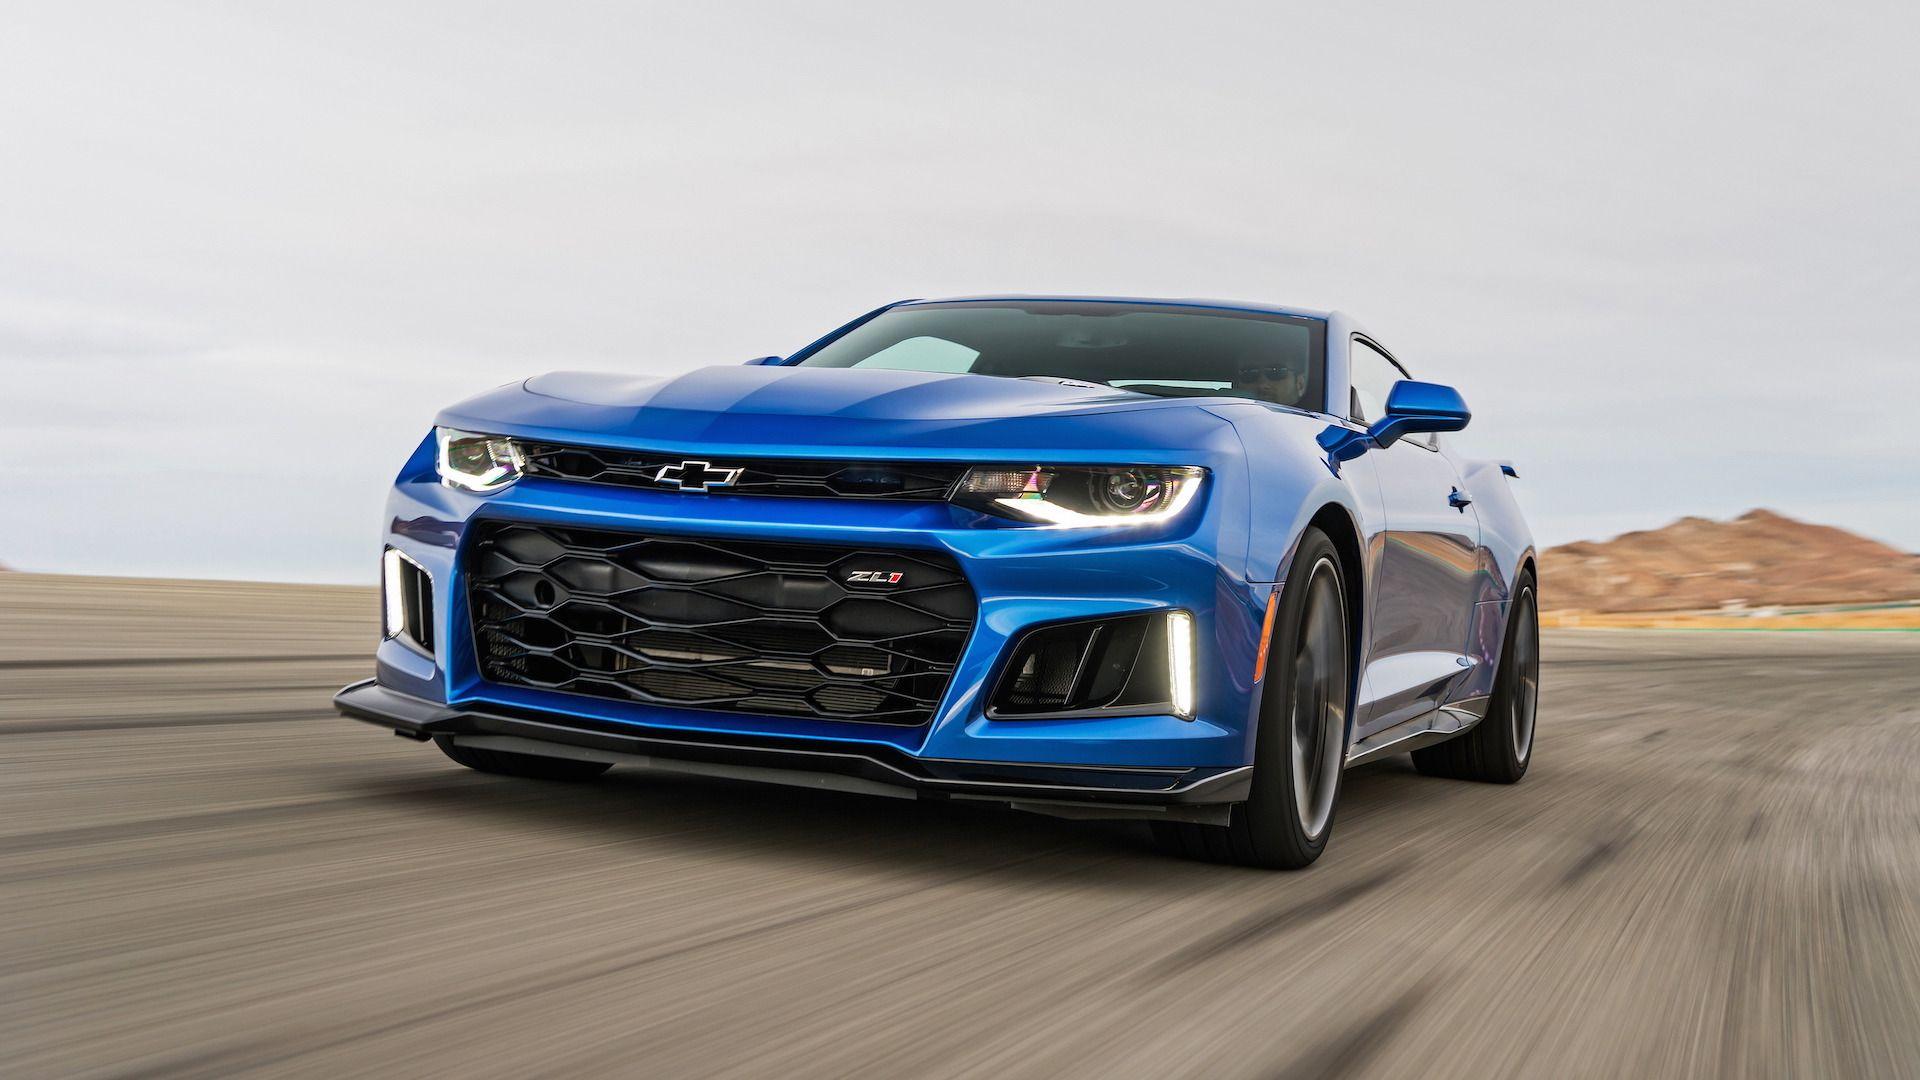 Fastest and slowest production Camaros of all time